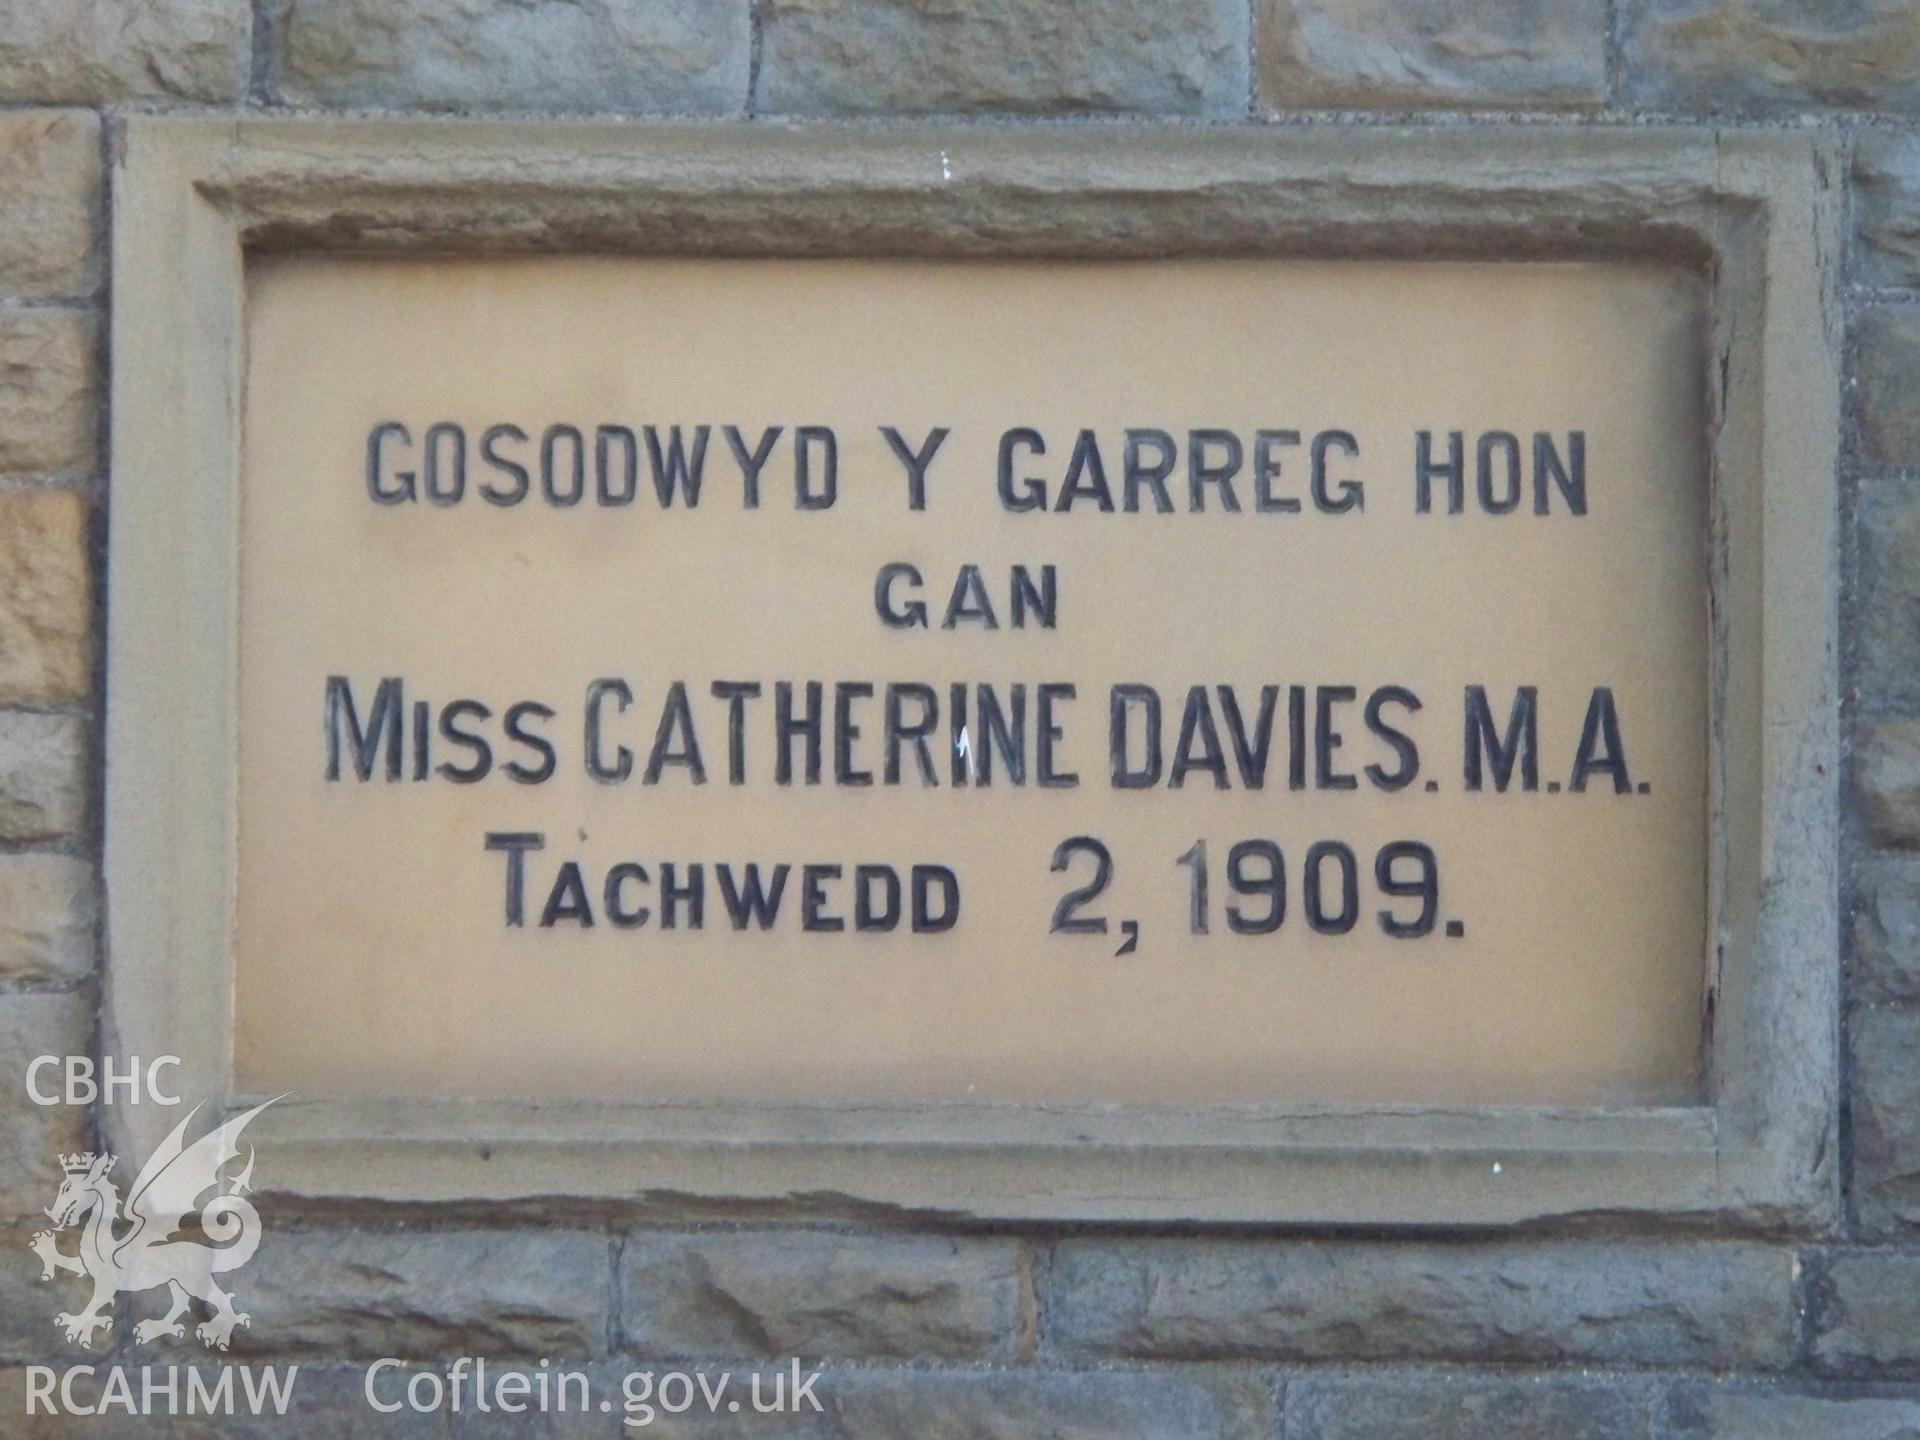 Nov 2 1909 foundation stone laid by Miss Catherine Davies on right side of NW front.